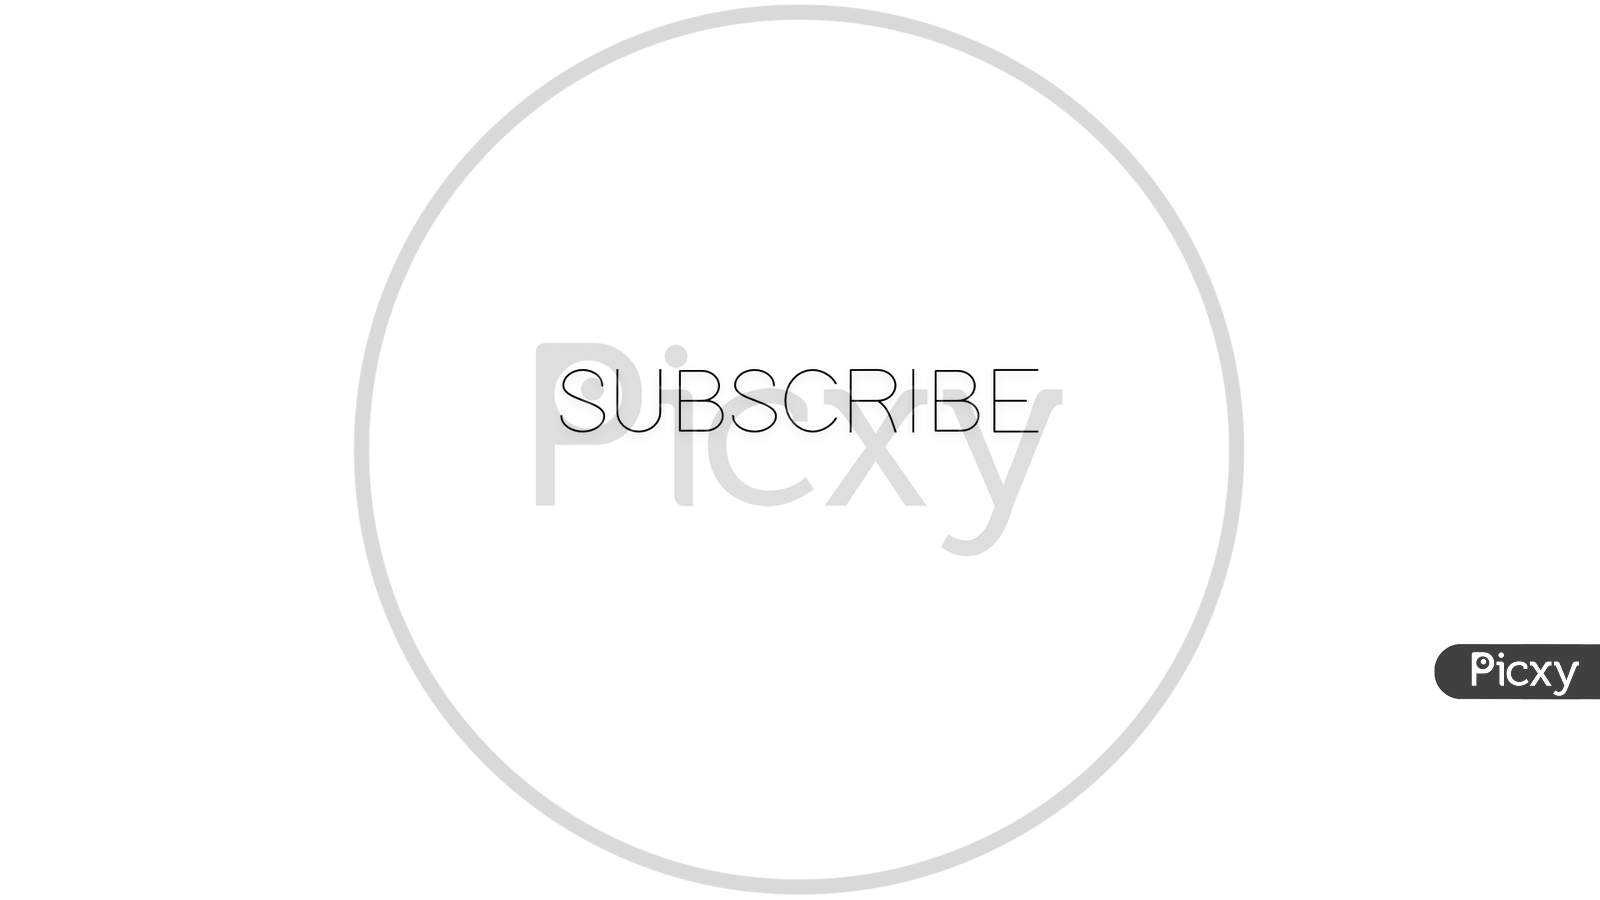 A simple and minimalist Subscribe button